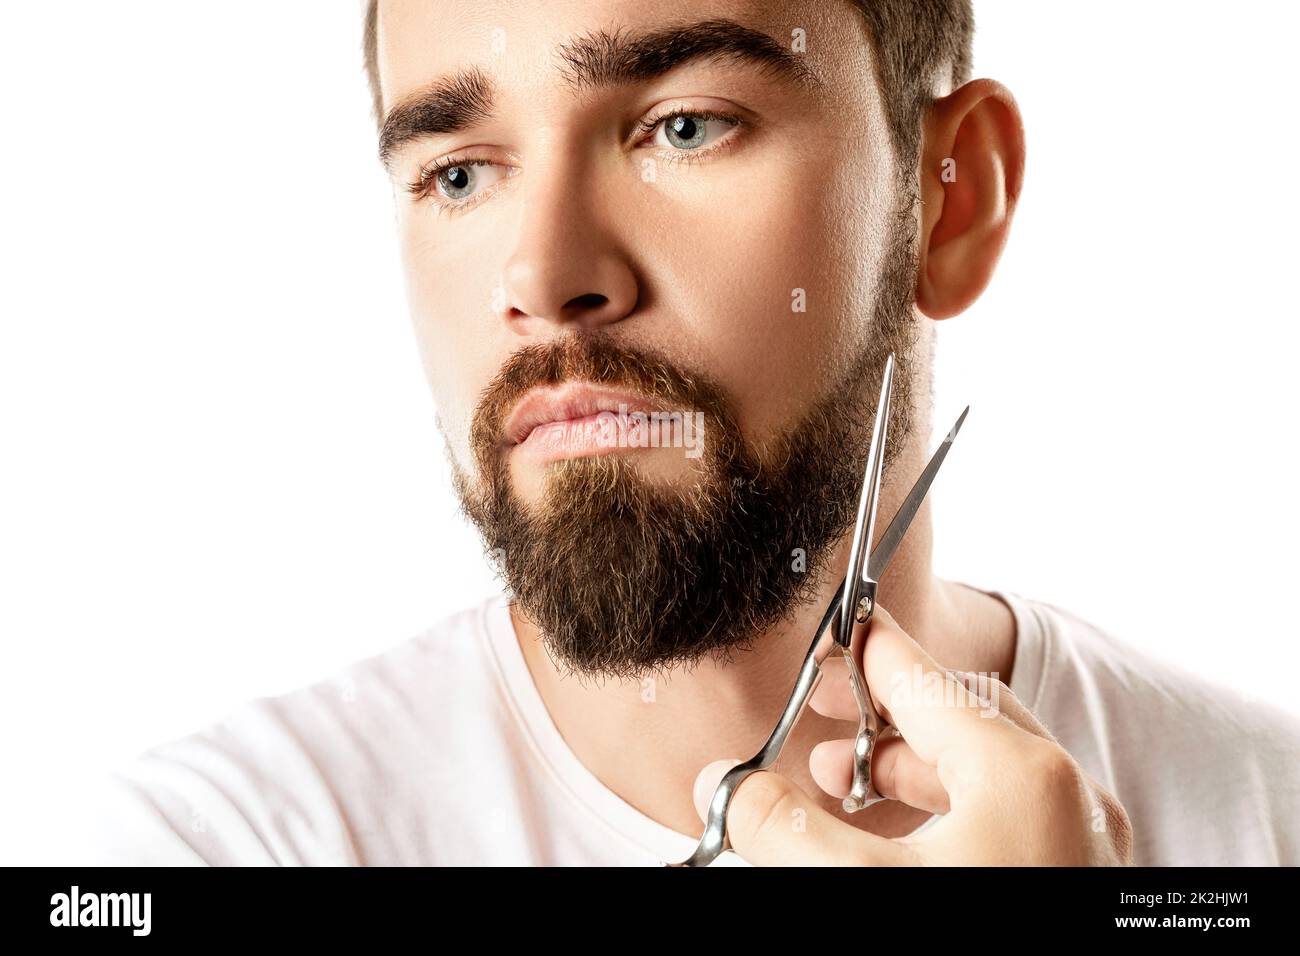 Handsome man trimming his beard with a scissors Stock Photo